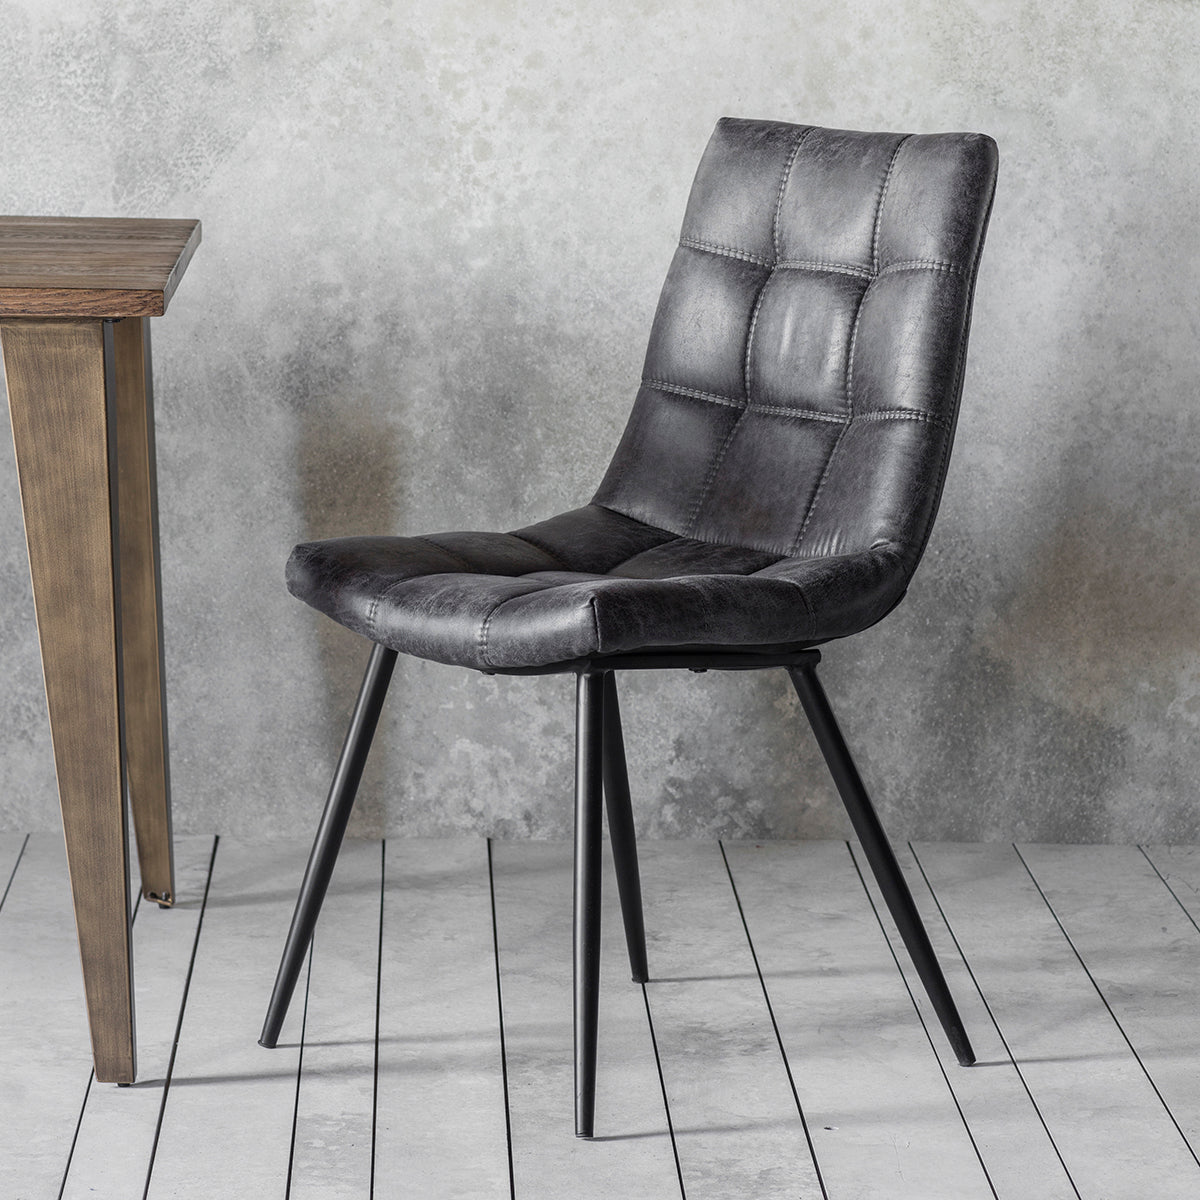 Sloane Charcoal Faux Leather Dining Chairs - Set of 2